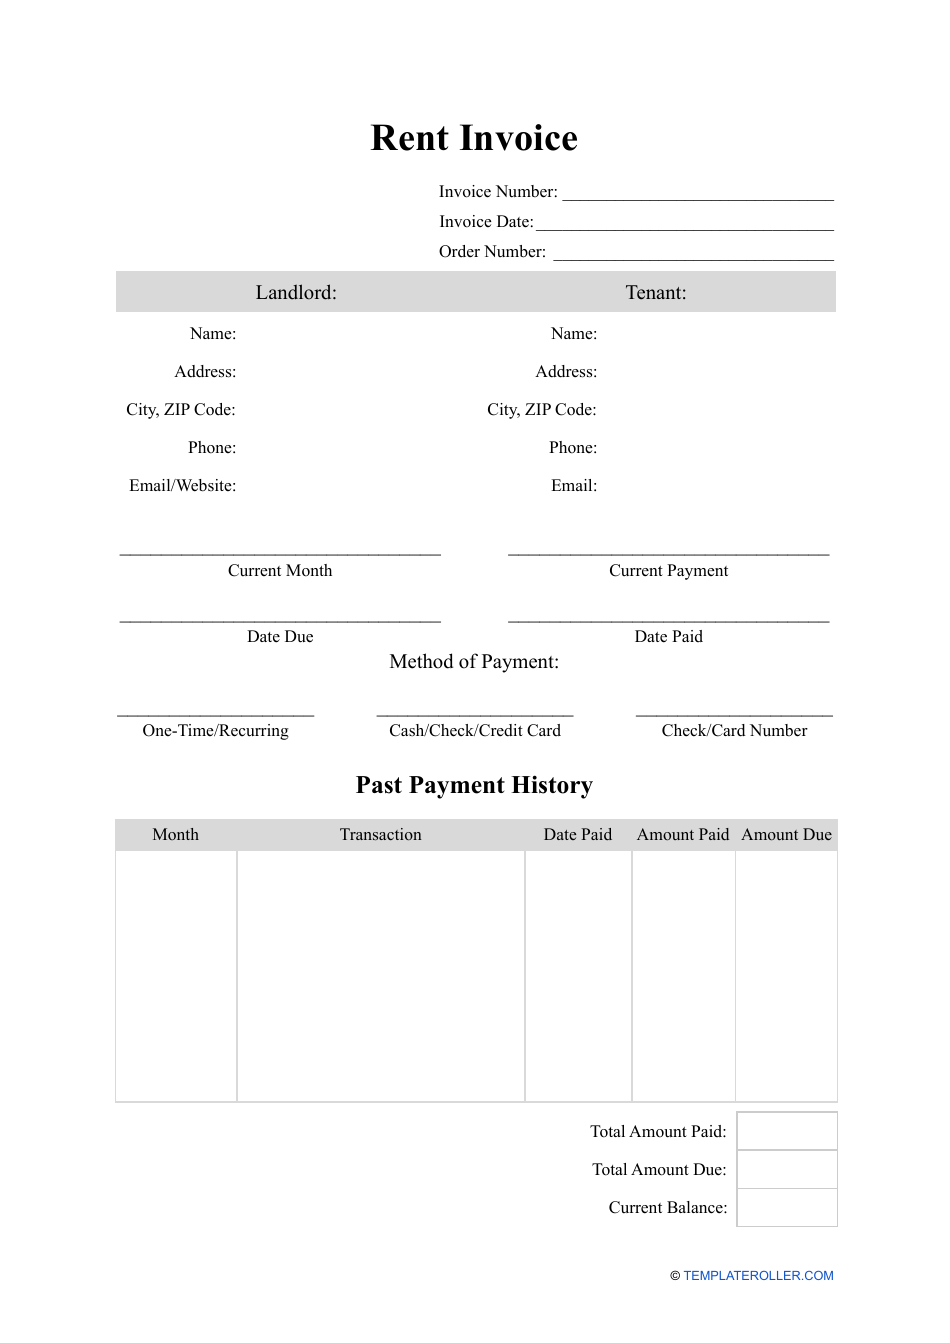 Rent Invoice Template, Page 1